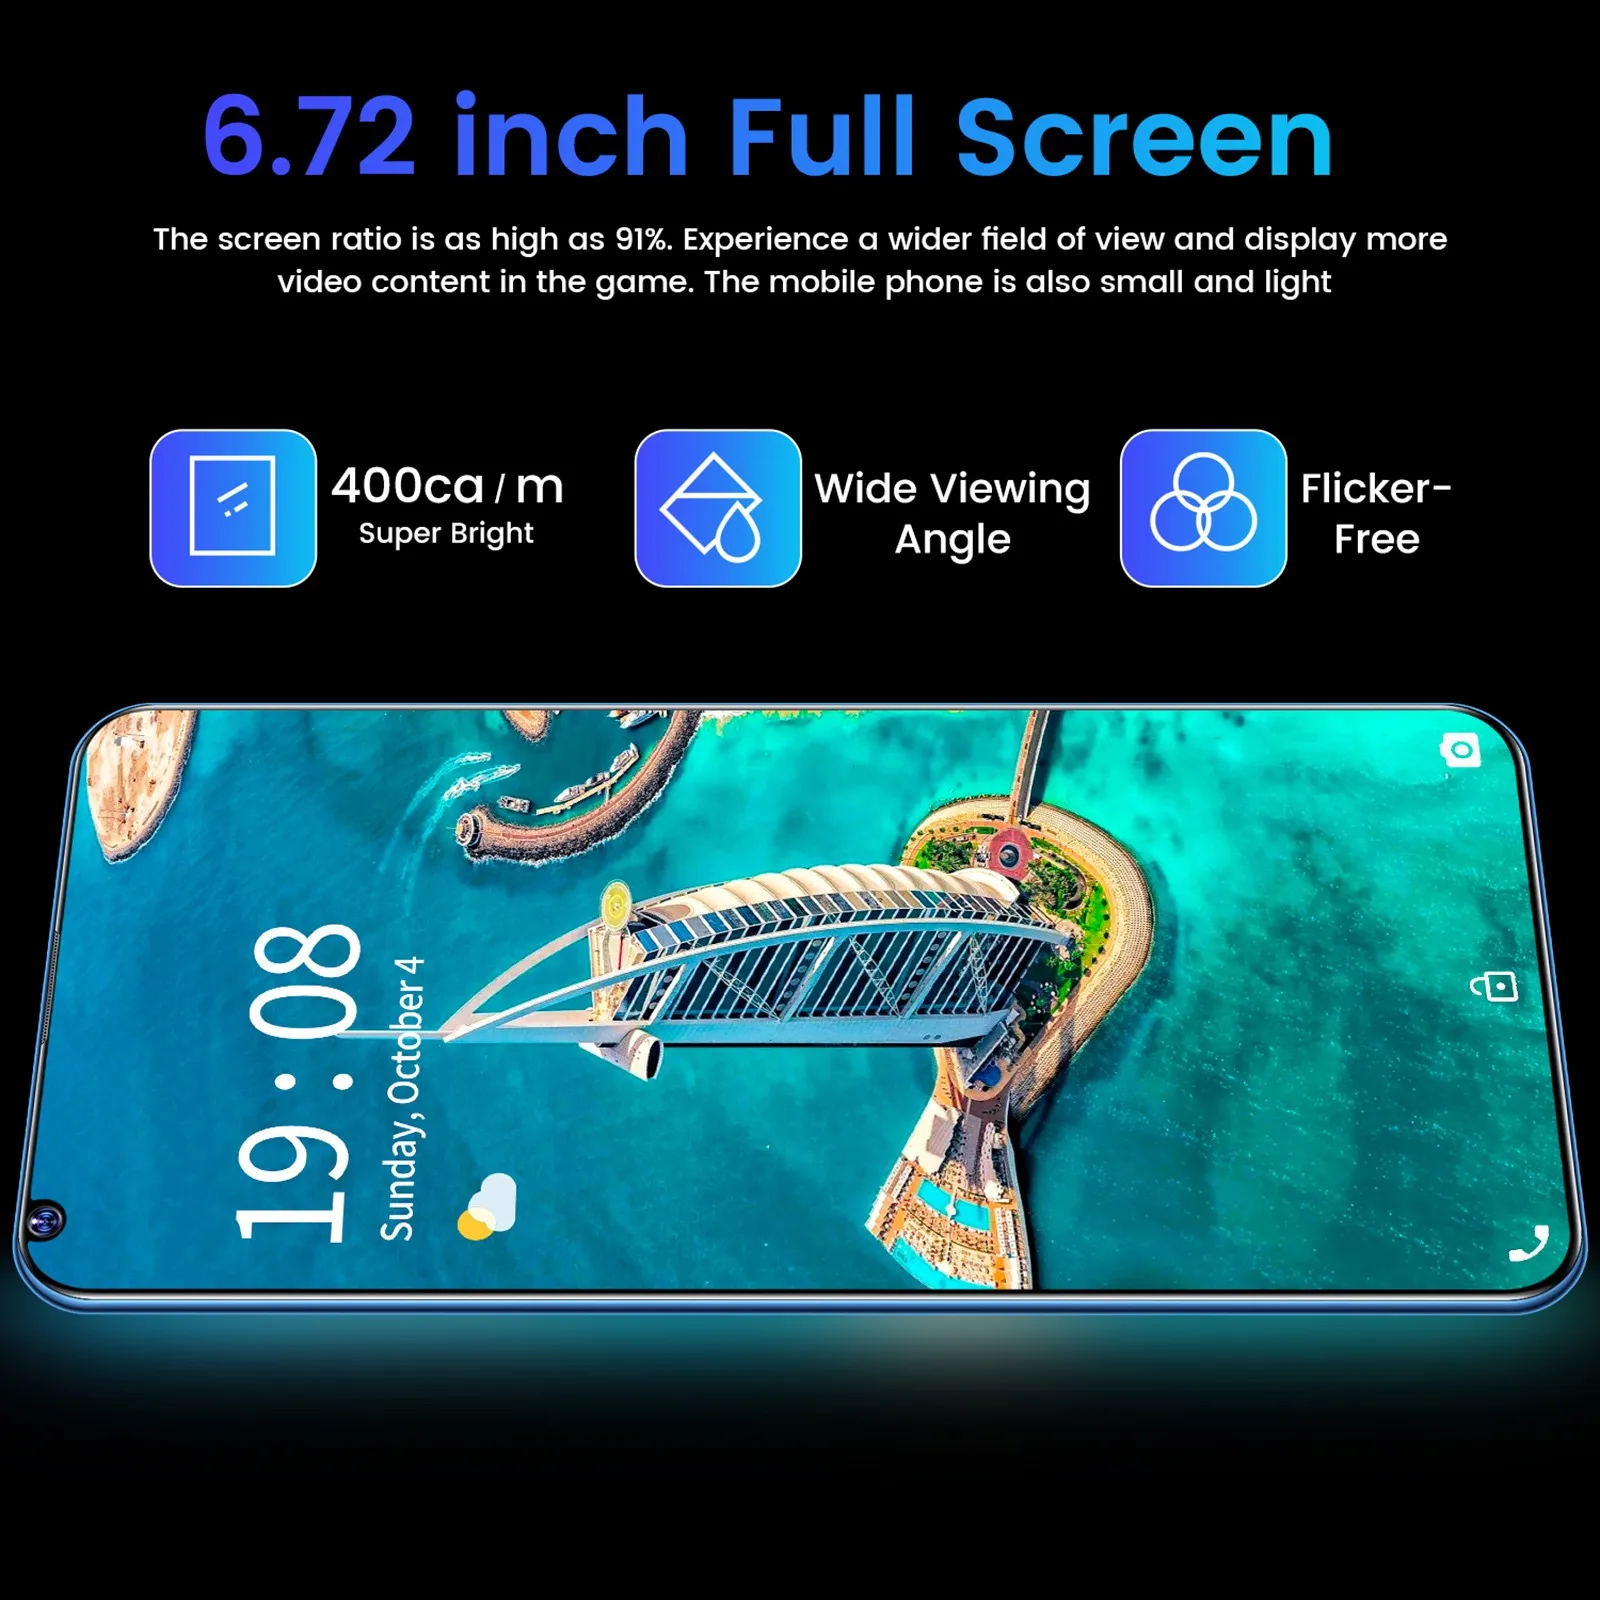 Smartphones X60 Pro Smart Phones Fashion 6.72 inch Dual SIM Smartphone Android 8.1 2+16G GSM/WCDMA 2300Mah Call Mobile Phone